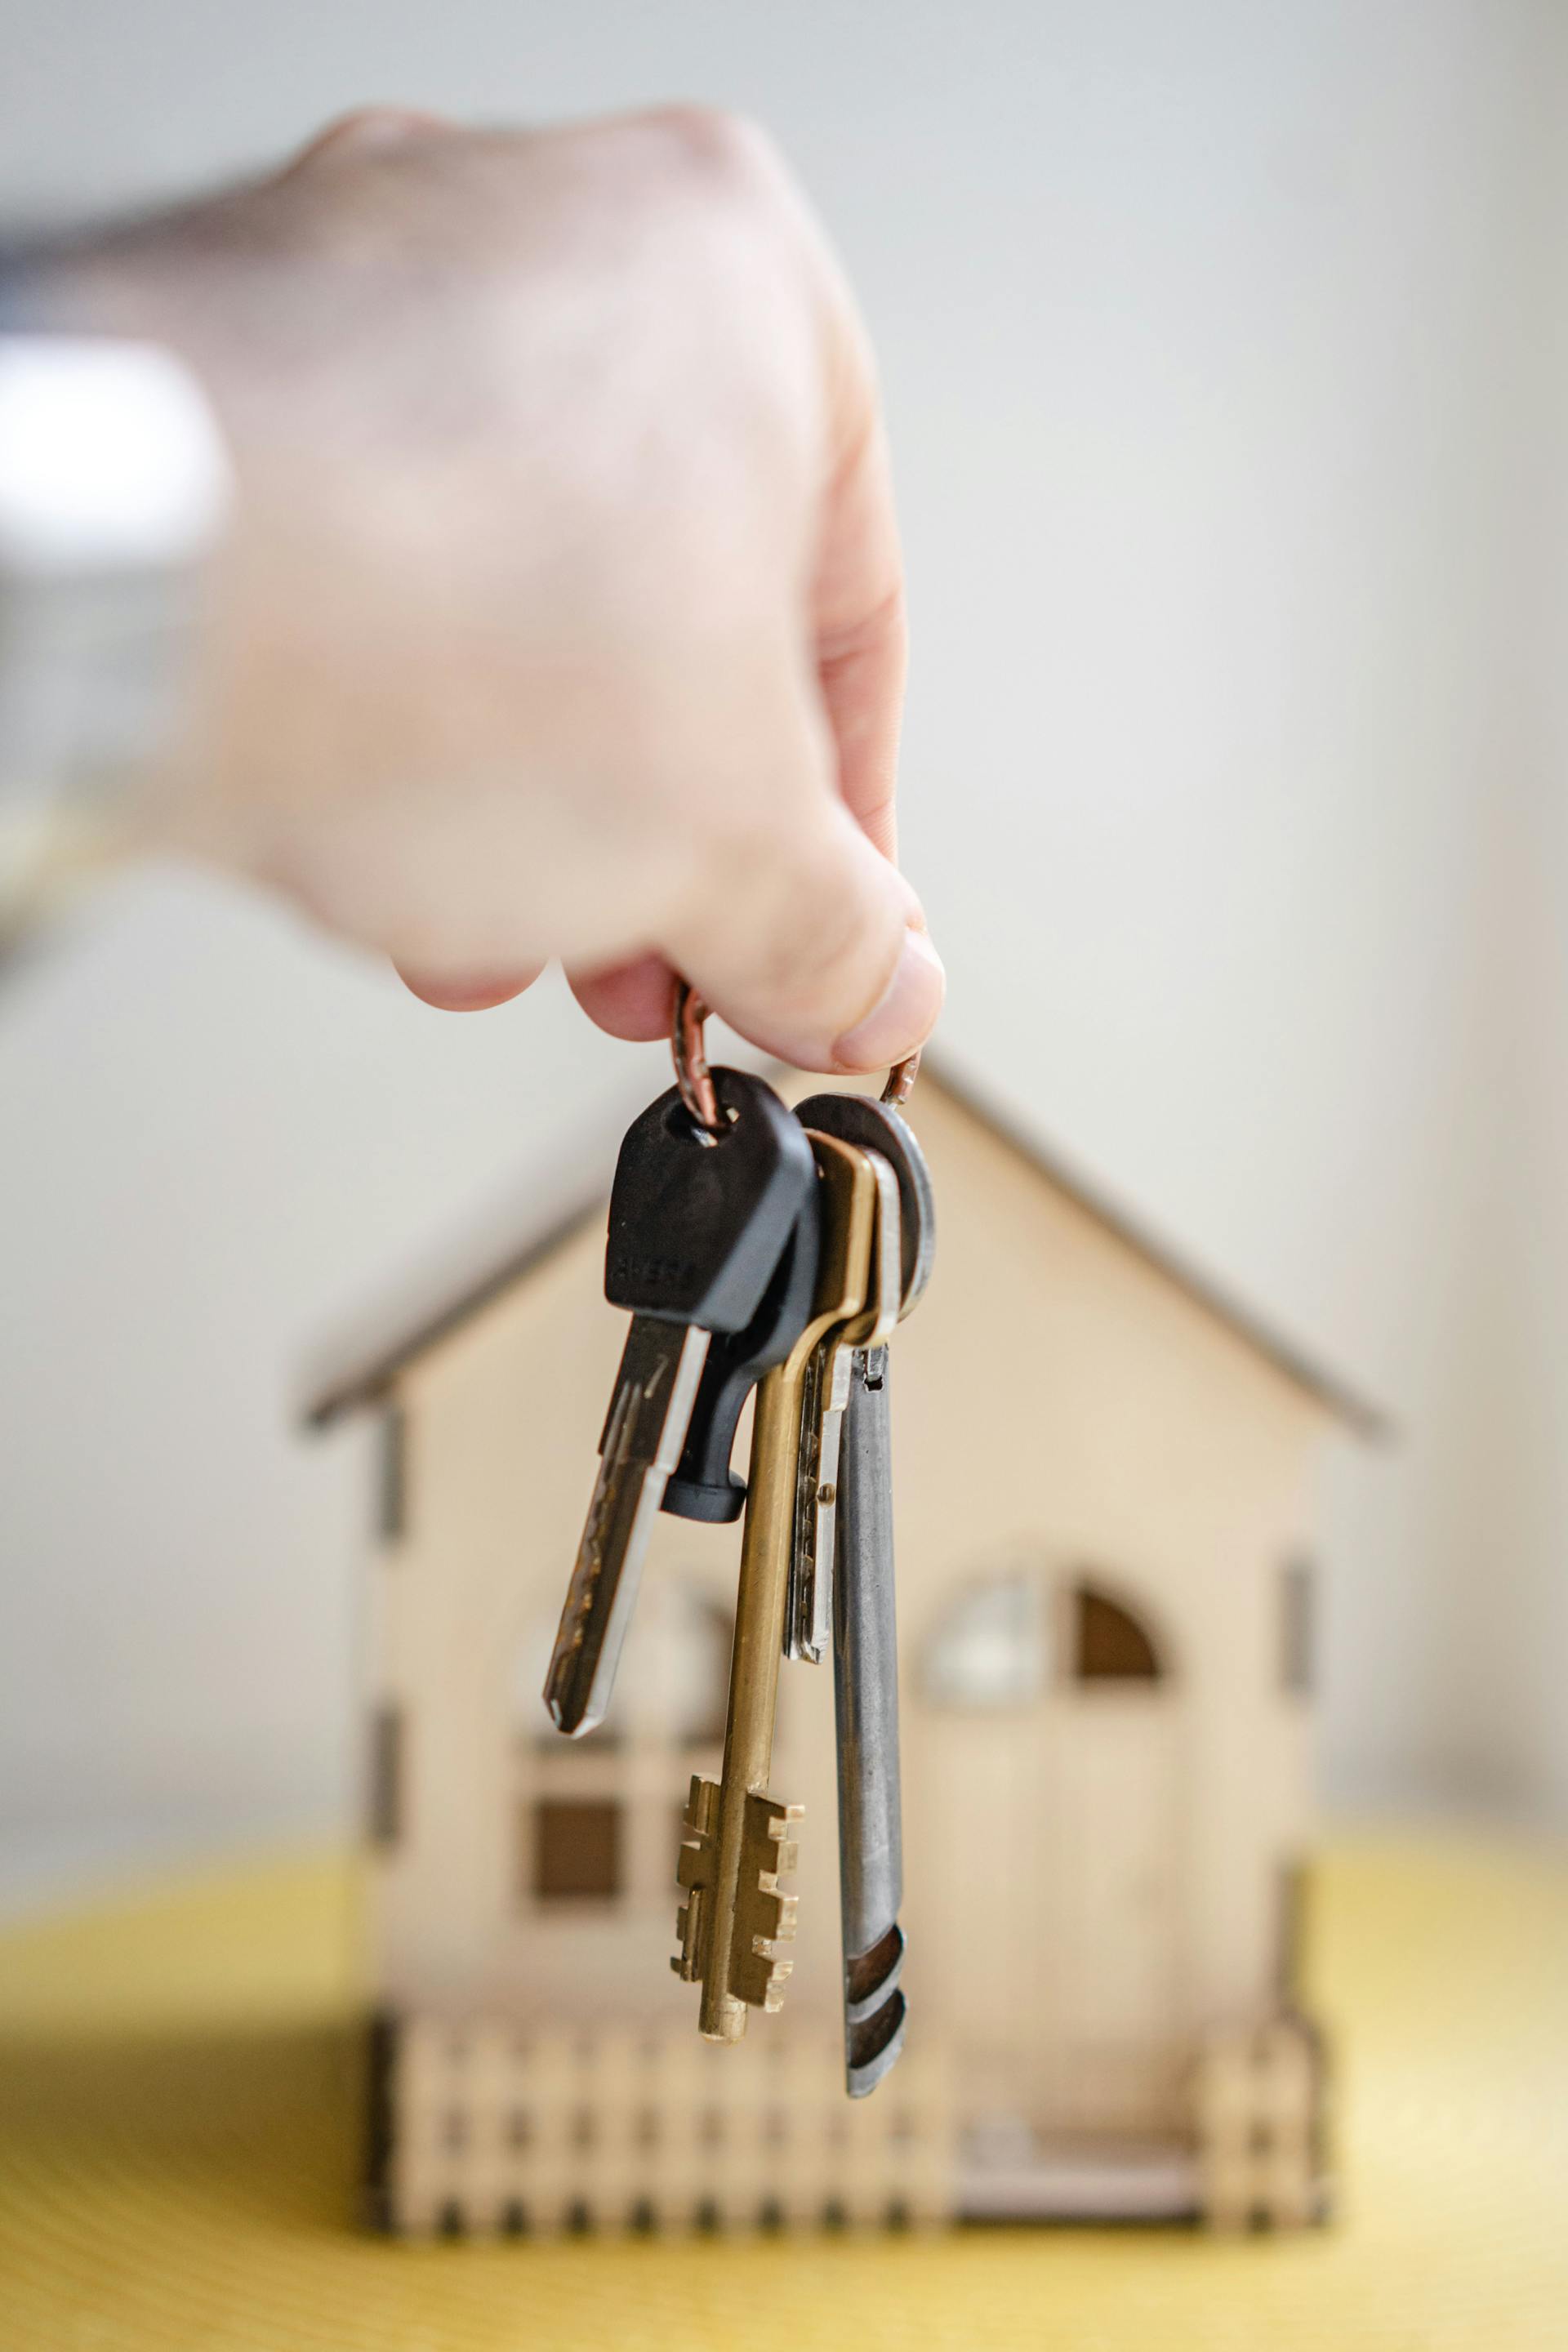 A person holding house keys | Source: Pexels